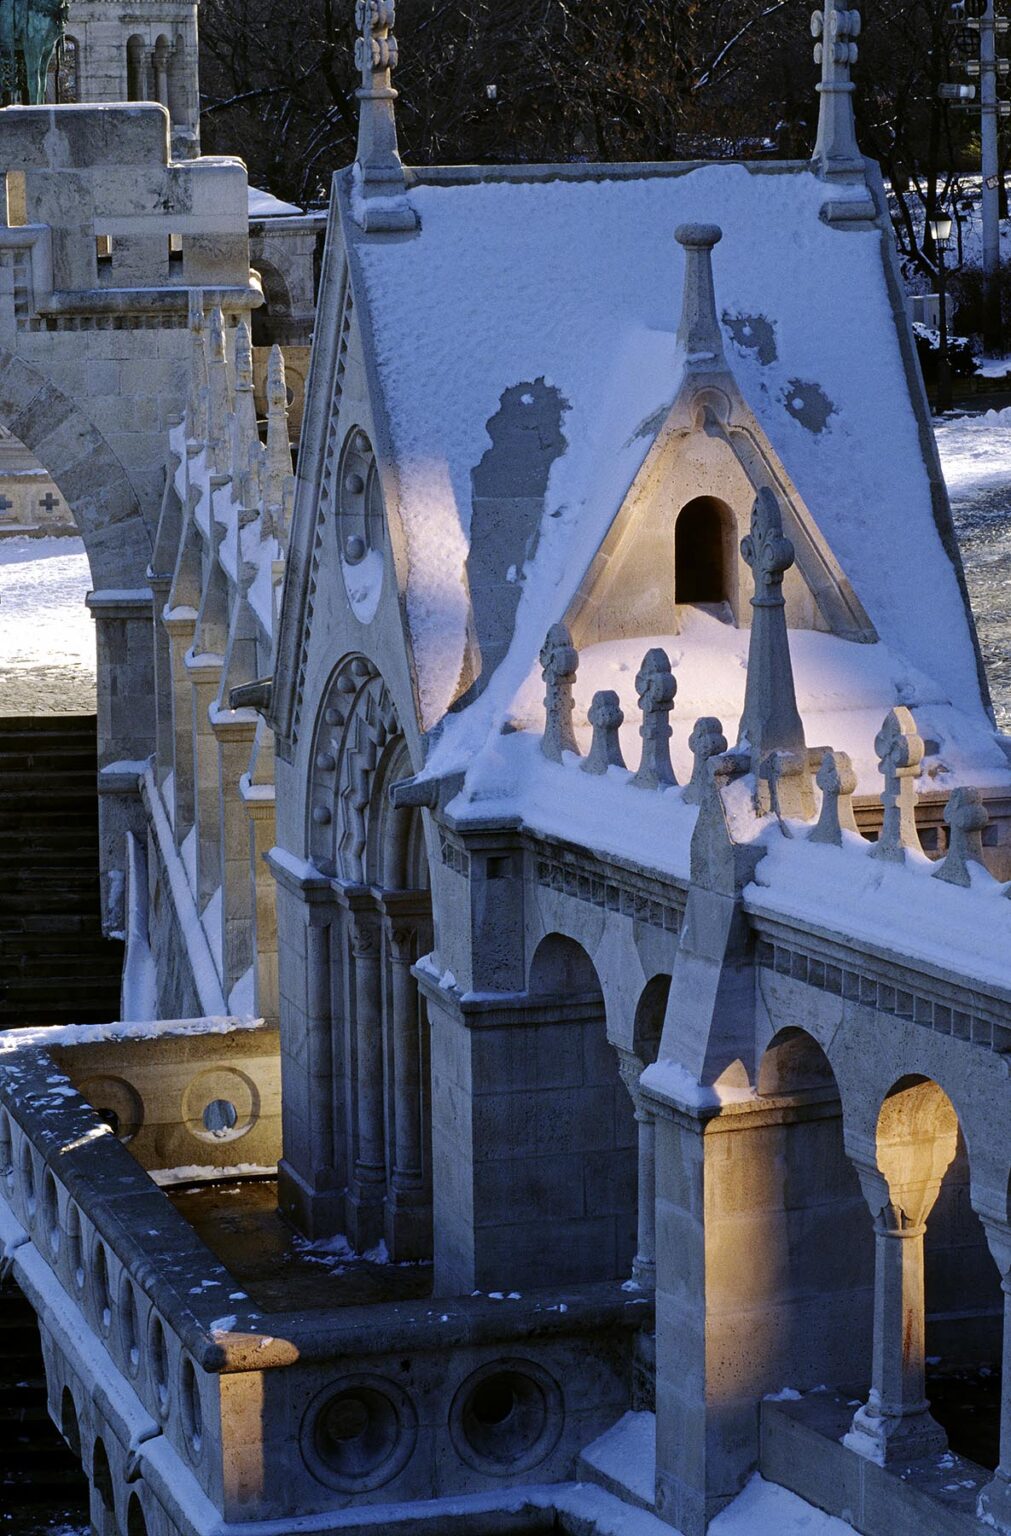 Built in the 19th century on CASTLE HILL the FISHERMAN'S BASTION provides great views of PEST - BUDAPEST, HUNGARY